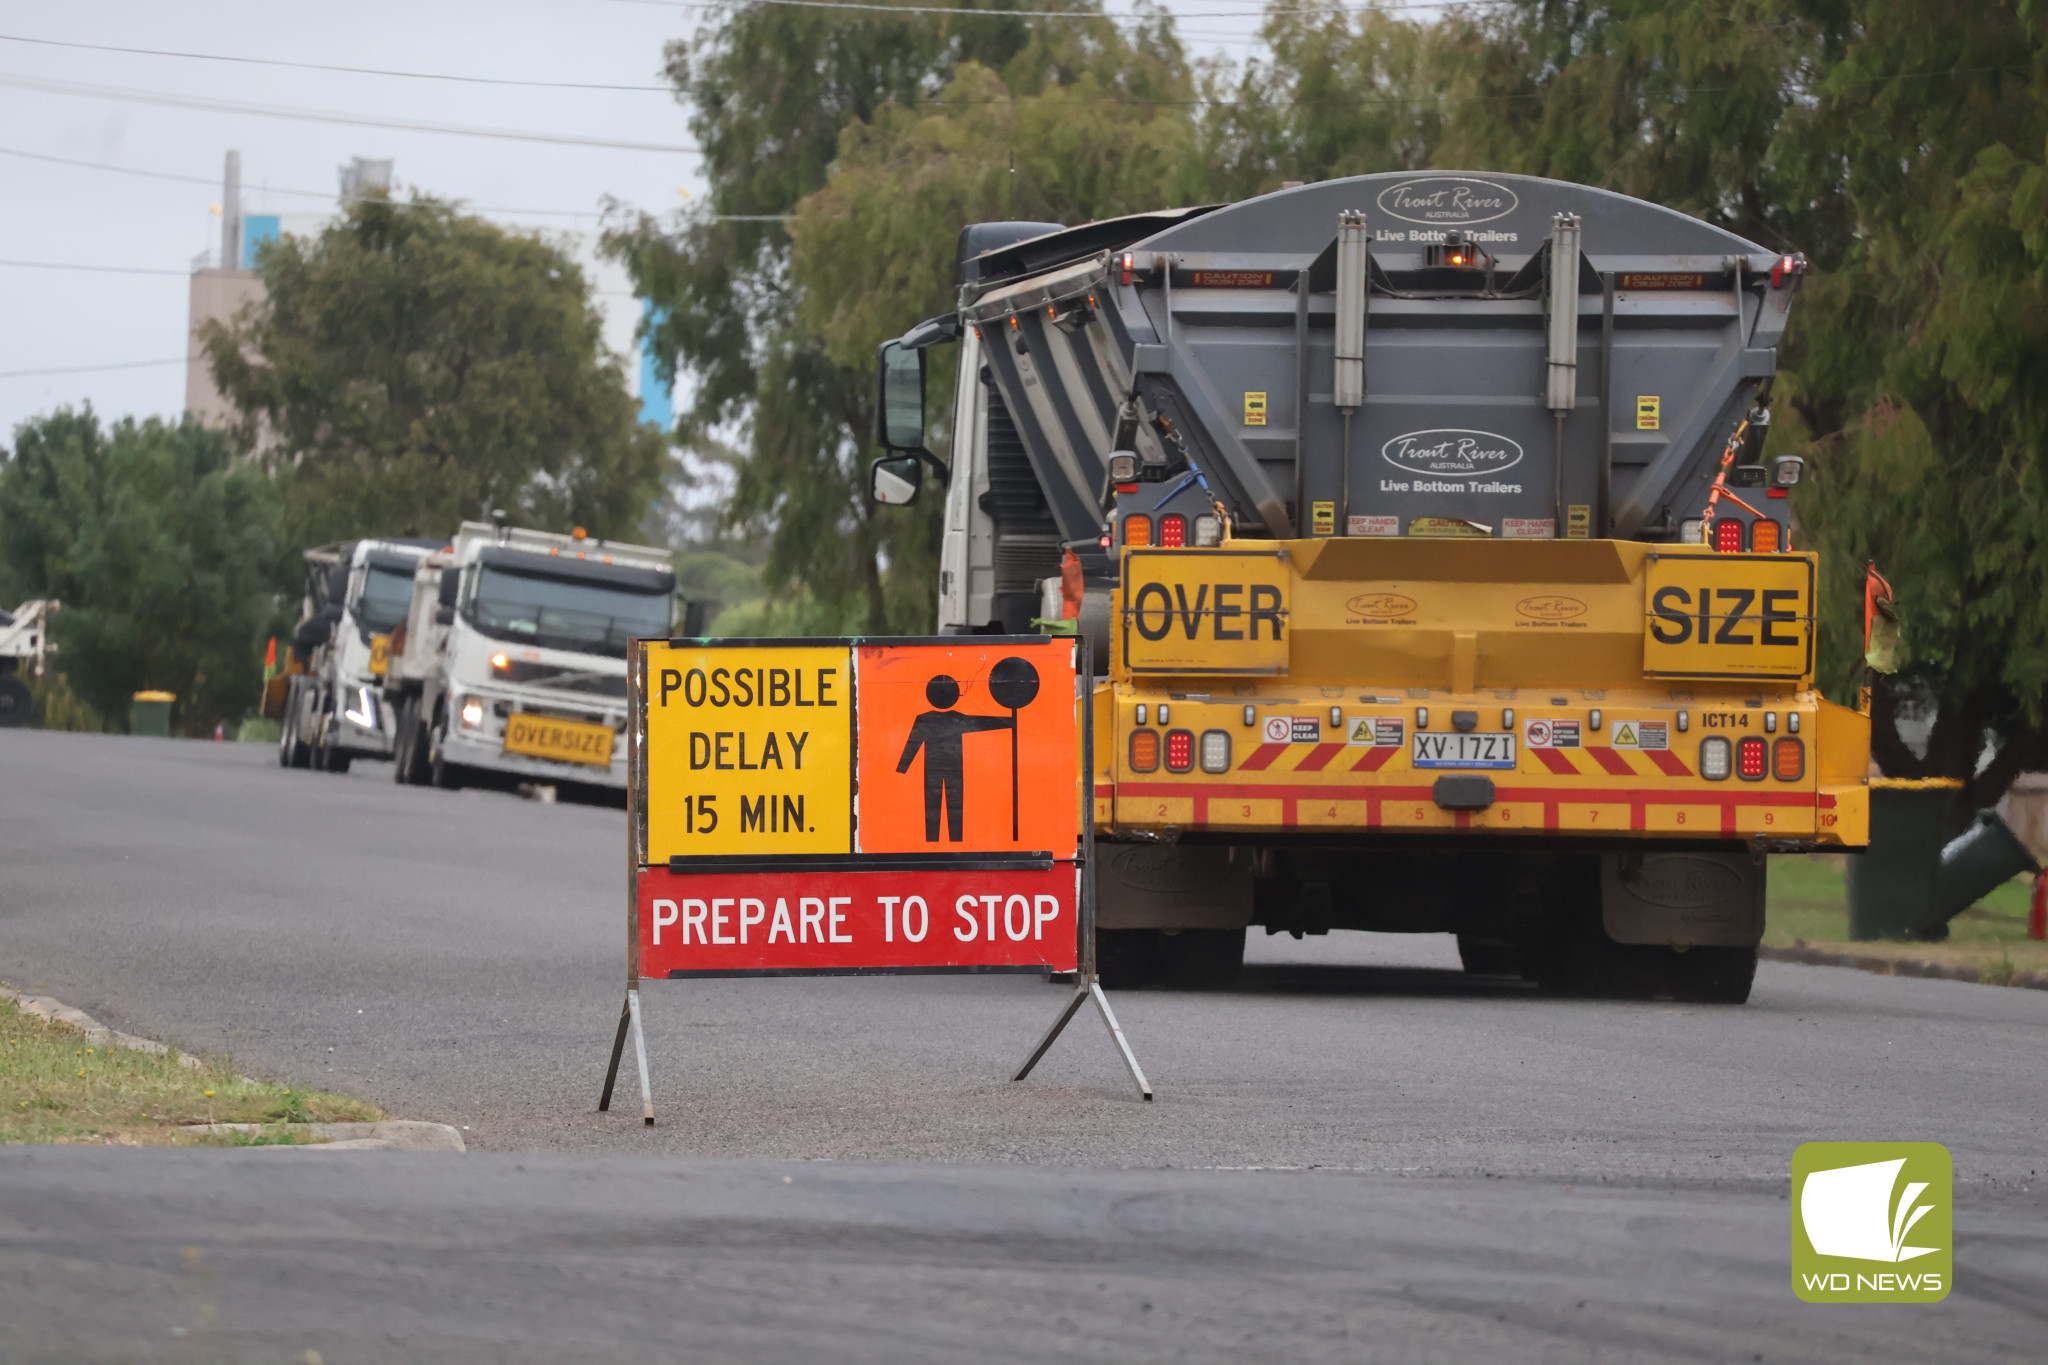 More than a kilometre of local roads in Cobden were resealed in recent weeks as part of Corangamite Shire’s annual road resealing program.